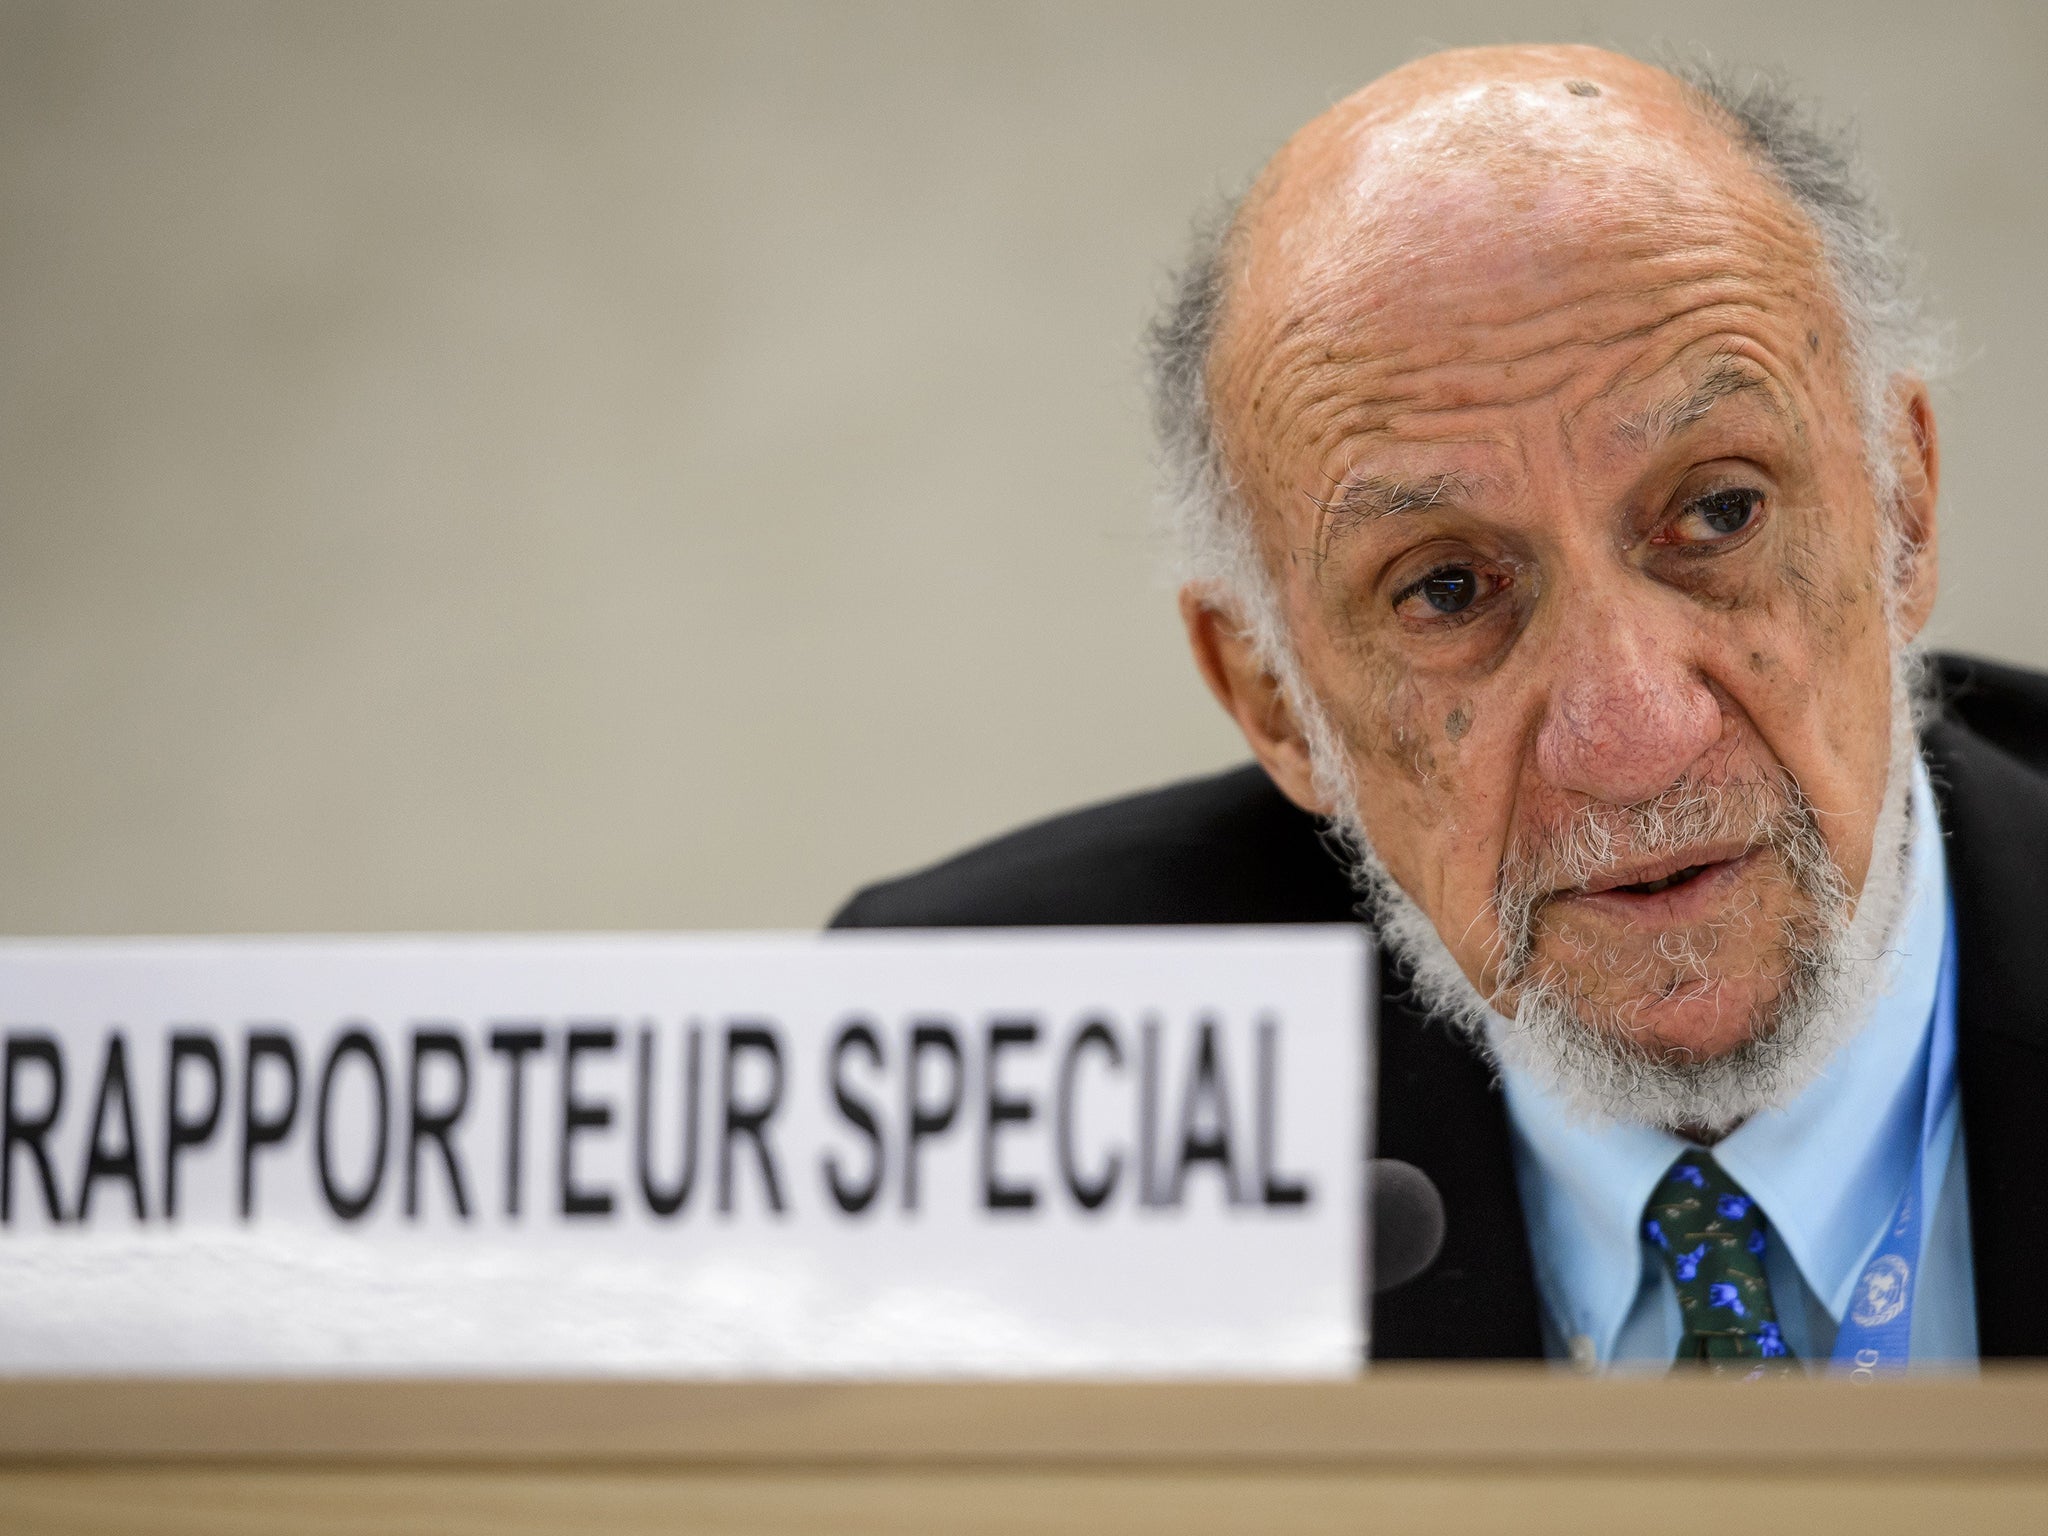 Former UN special rapporteur on the human rights situation in the Palestinian territories Richard Falk